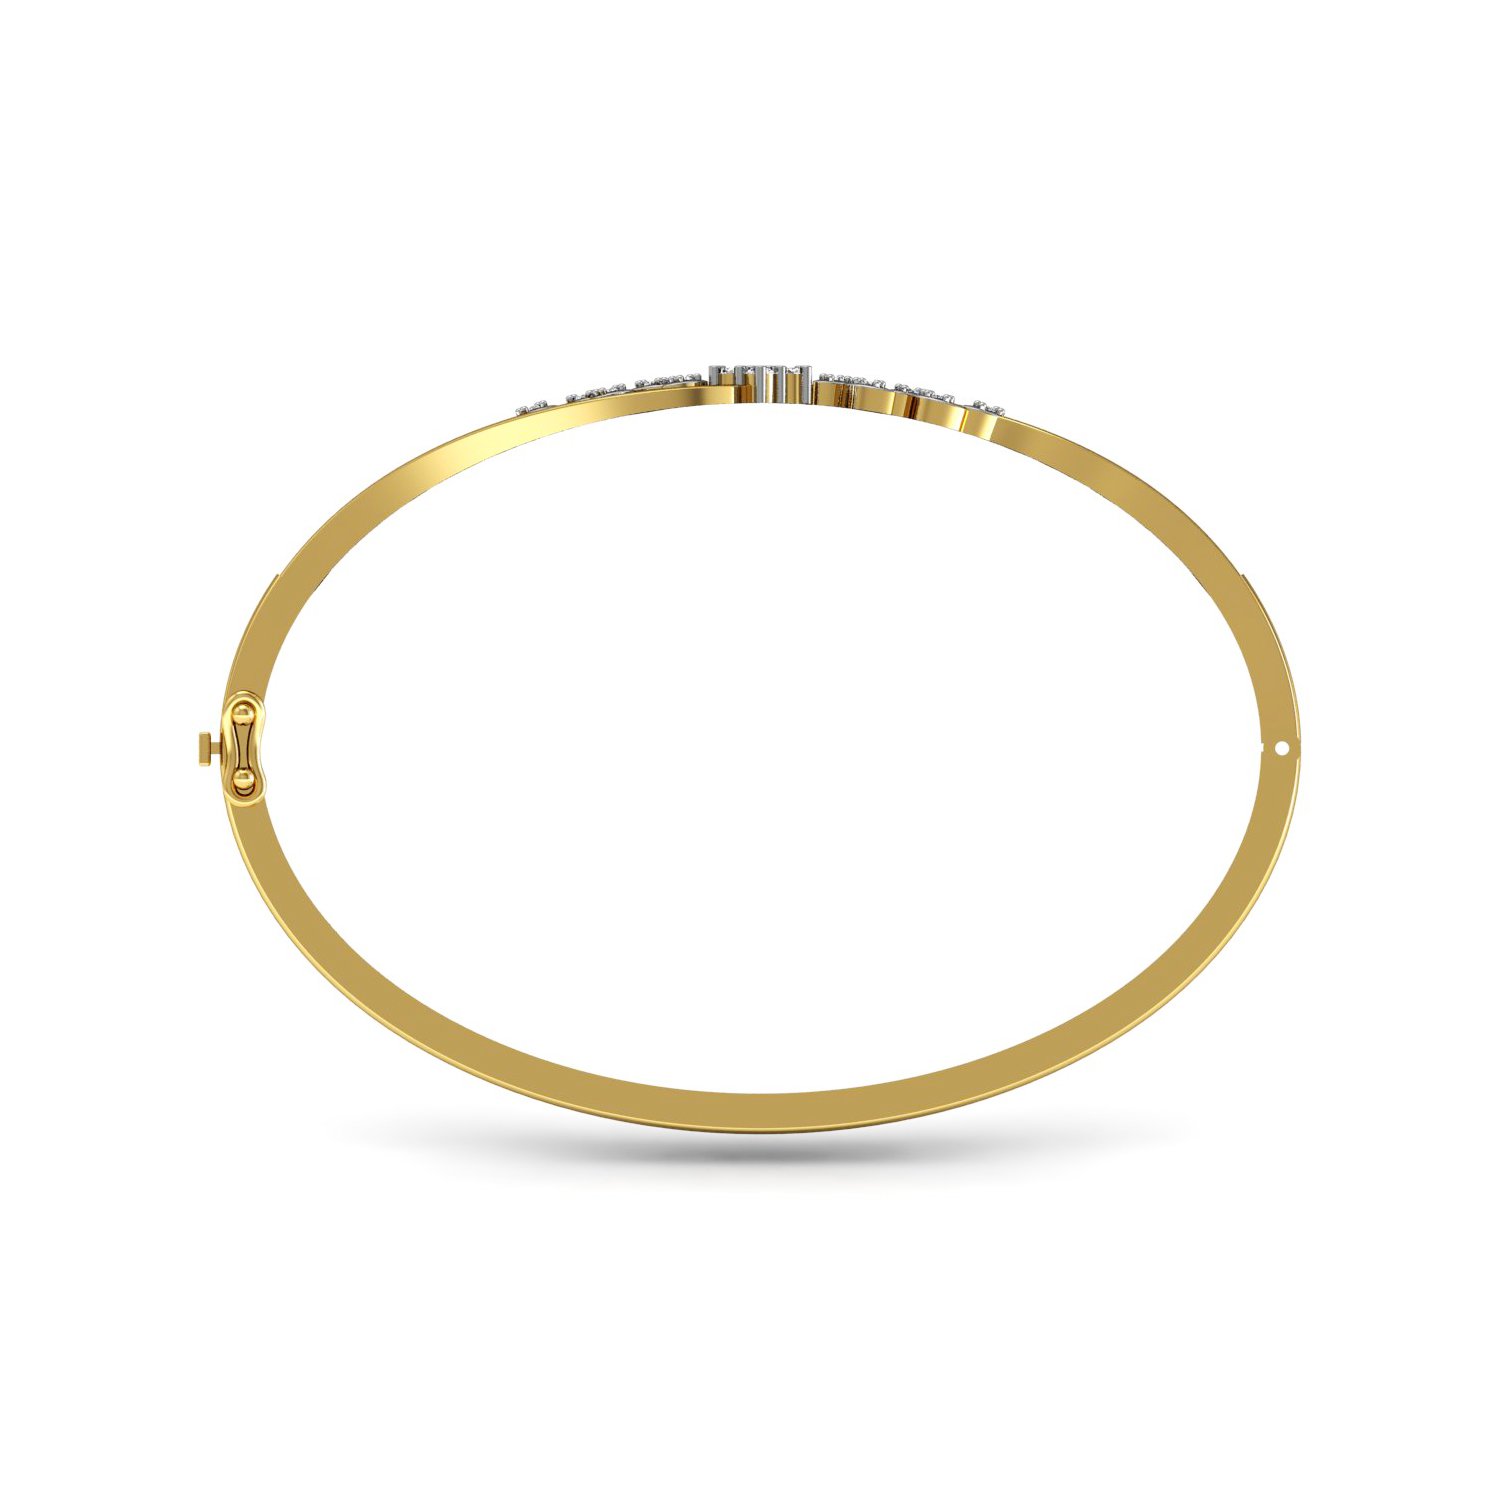 Solid gold real diamond openable bracelet